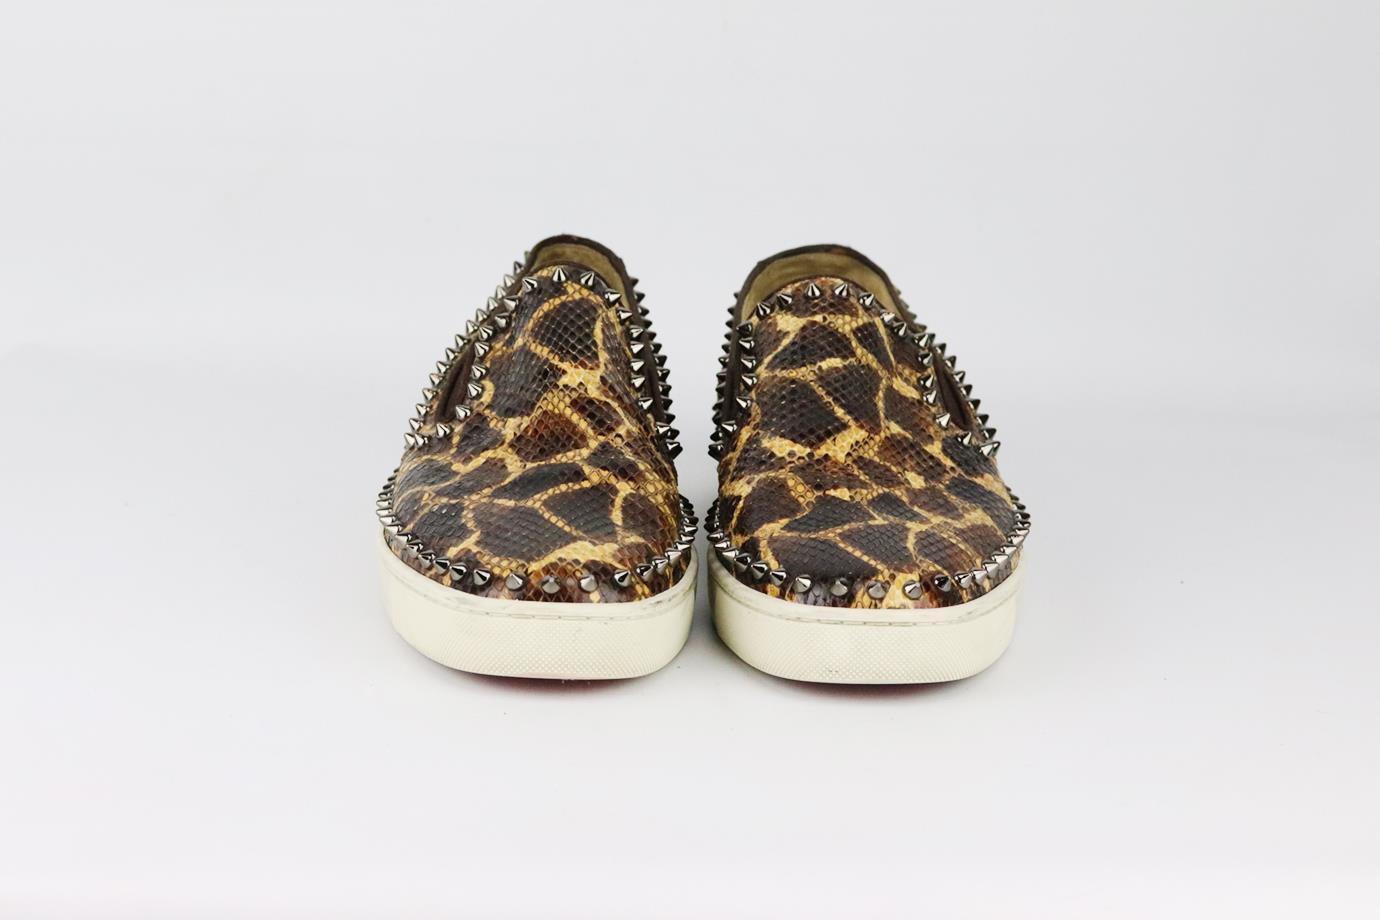 Christian Louboutin spiked python slip on sneakers. Made from brown, black and tan python with spikes in a classic slip-on sneaker style on the brand’s iconic red sole. Brown, black and tan. Slip on. Does not come with box or dustbag. Size: EU 43